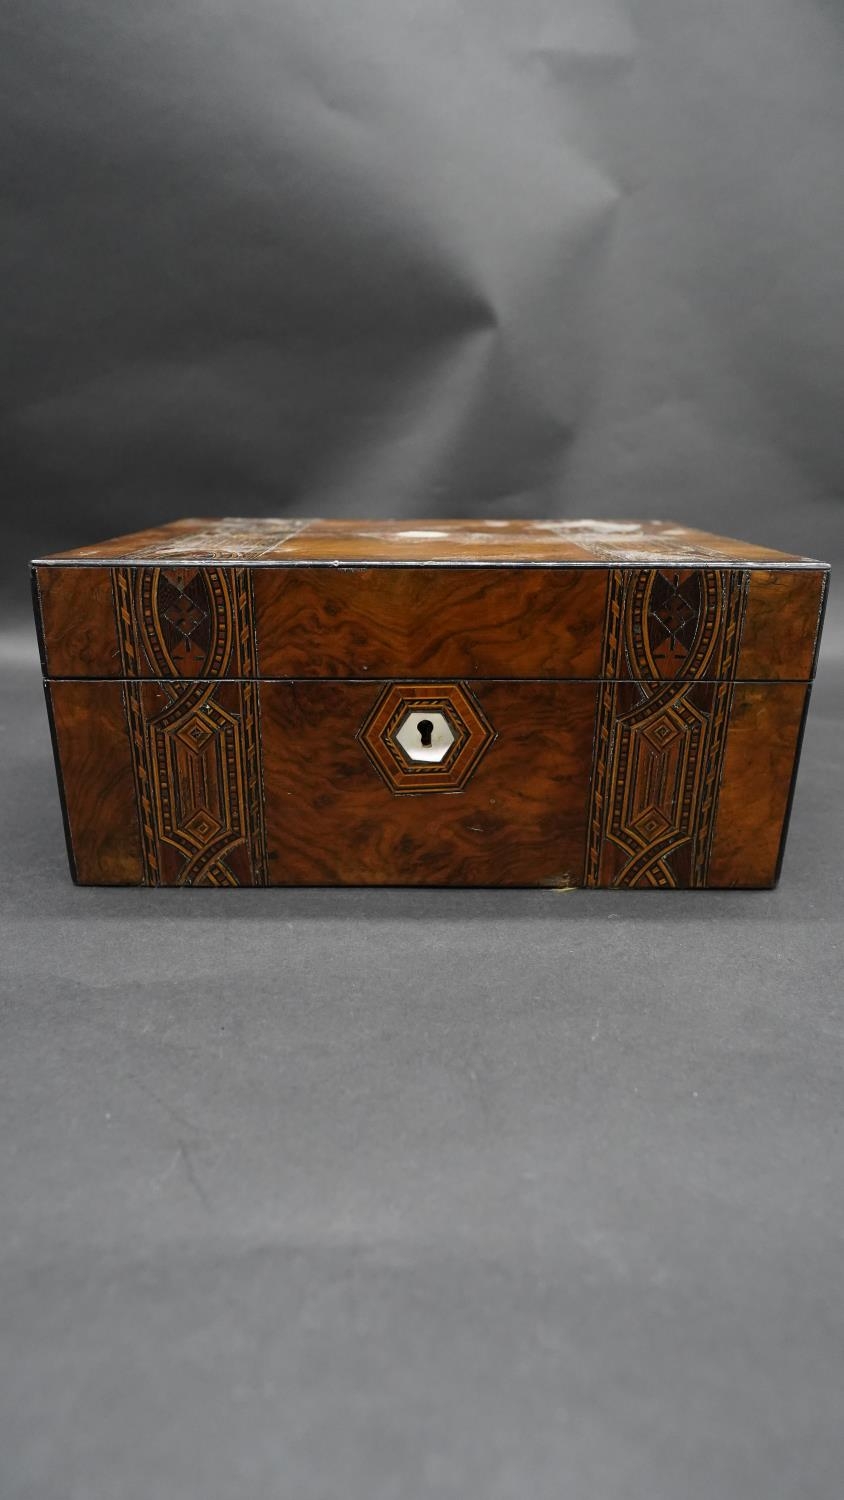 A Victorian burr walnut fitted jewellery box with marquetry and mother of pearl inlay with purple